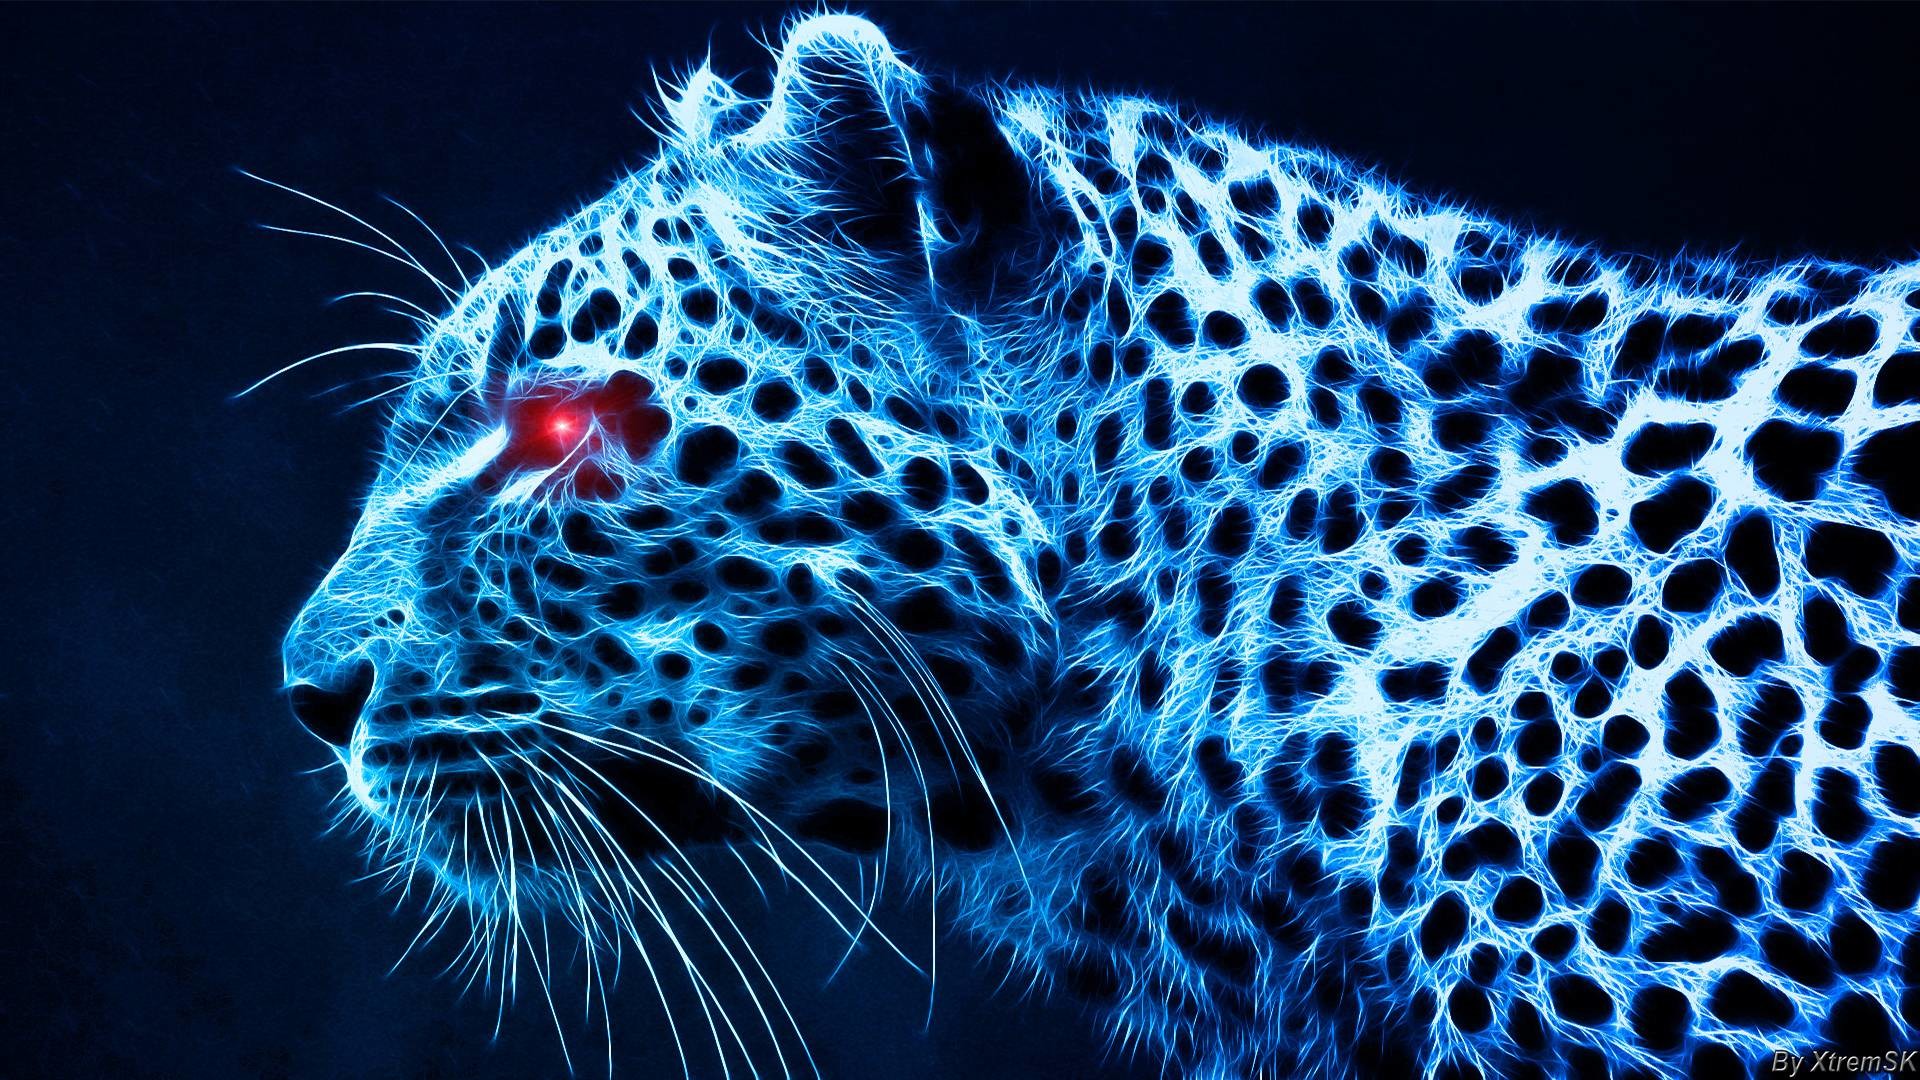 1920x1080 Wallpapers For > Blue Tiger Wallpaper Hd